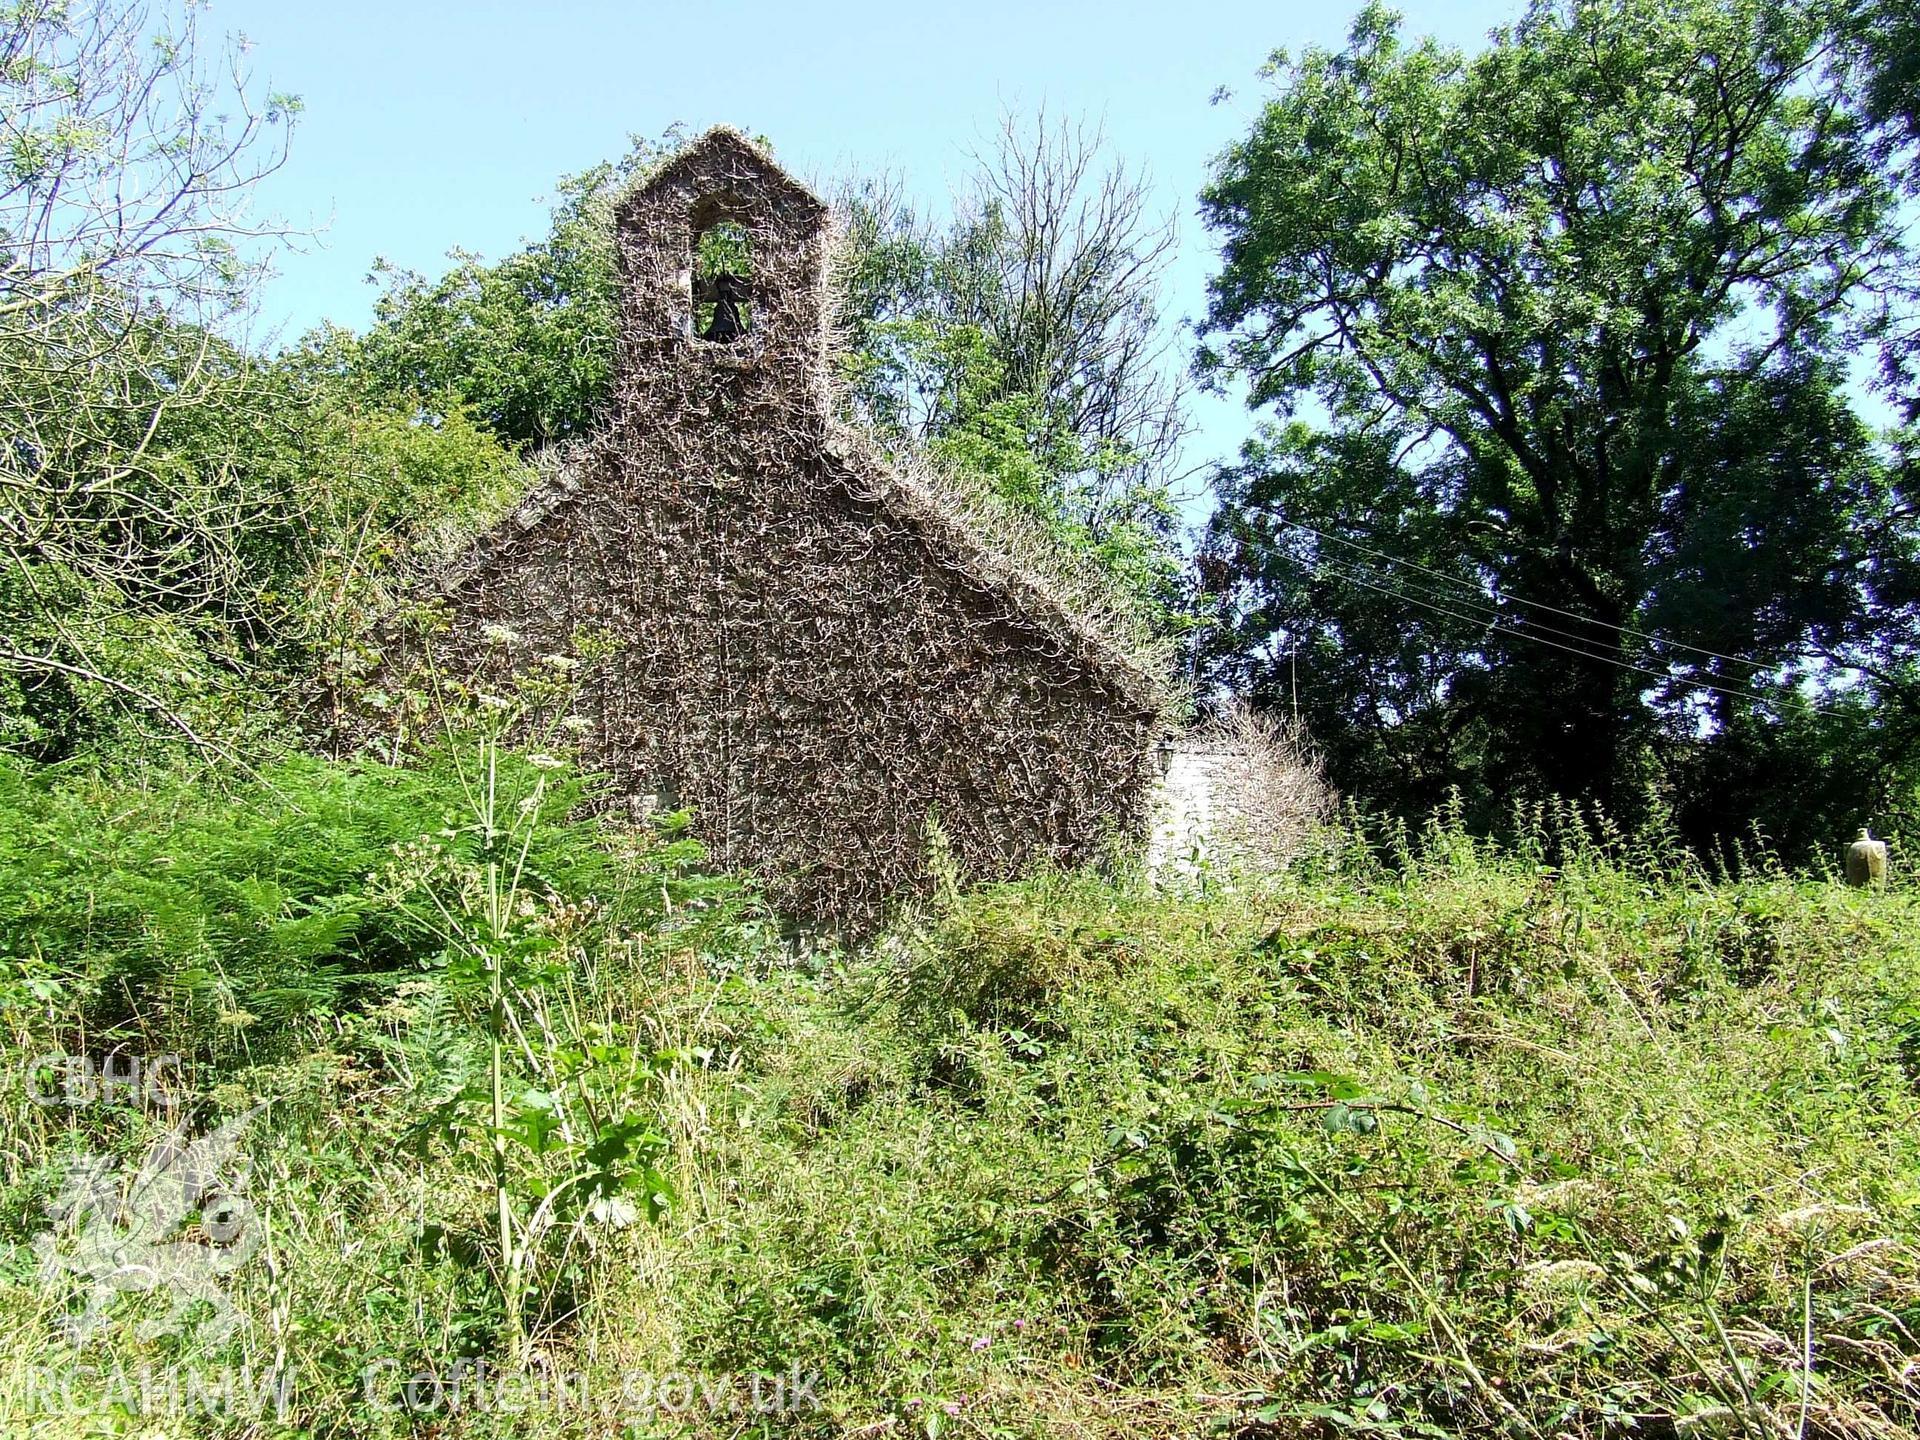 Digital colour photograph showing St Justinian's Church, Llanstinian from the west. Produced by Martin Davies in 2022.